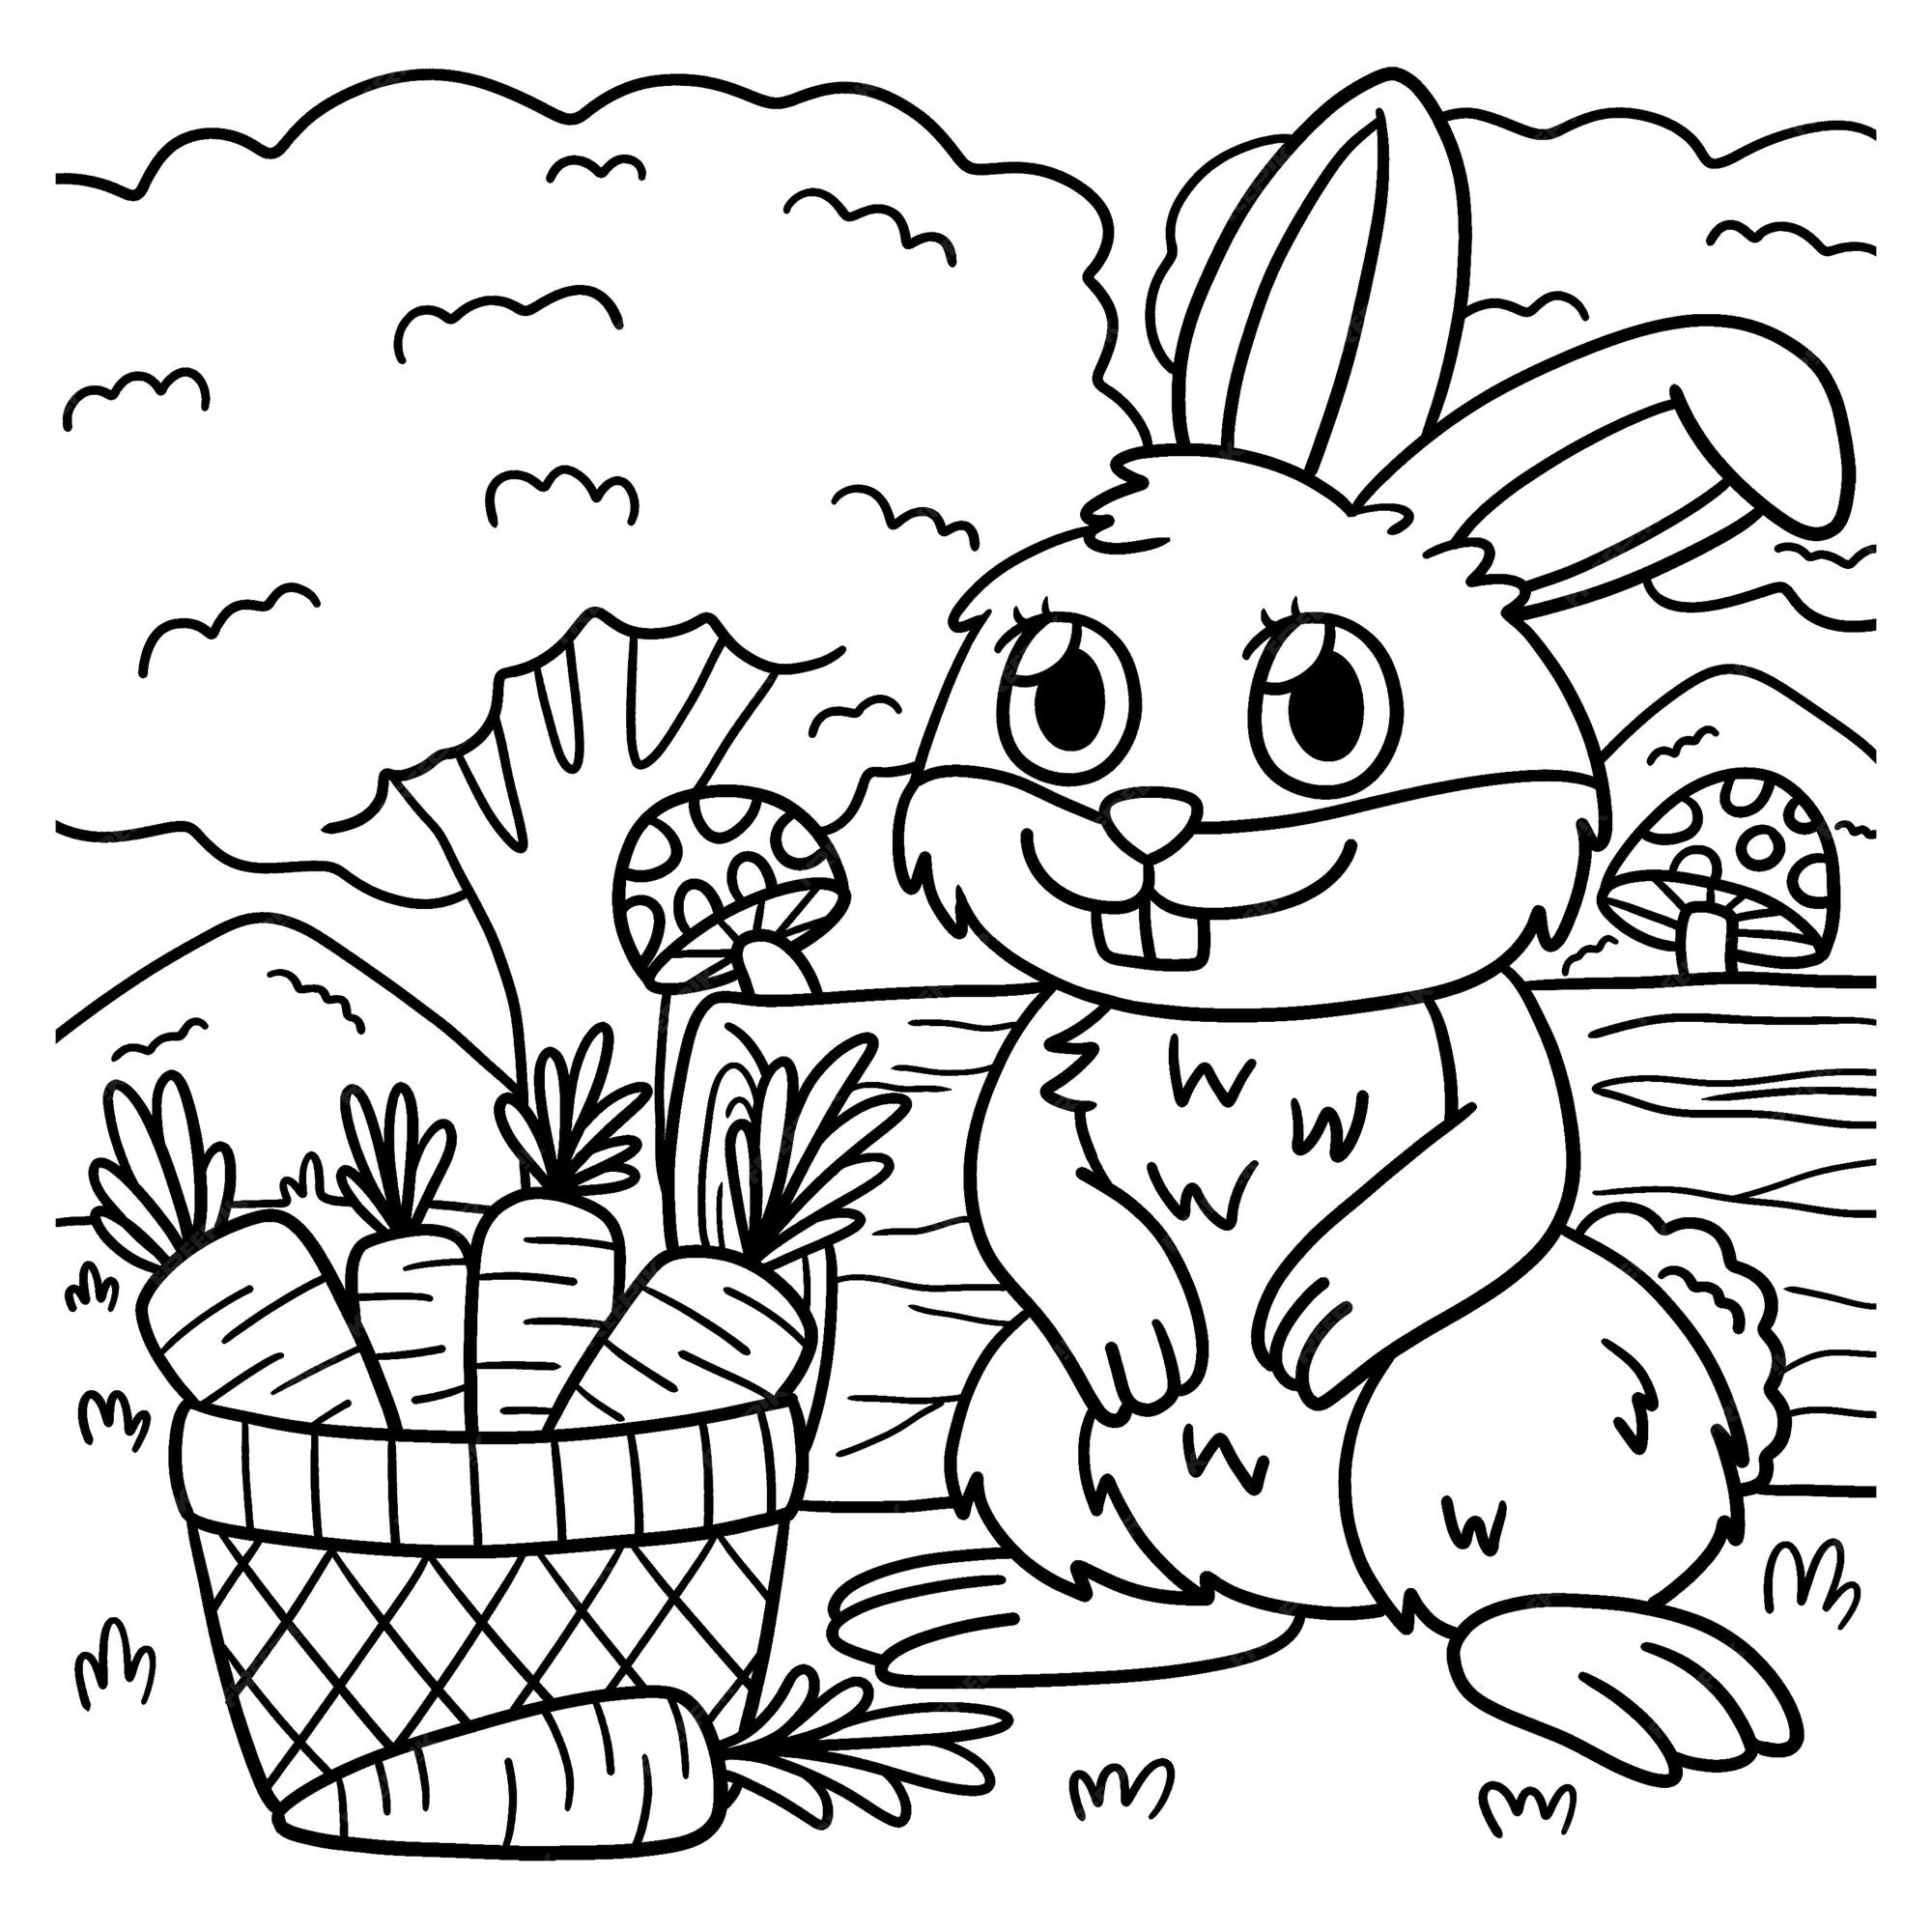 Premium vector rabbit animal coloring page for kids